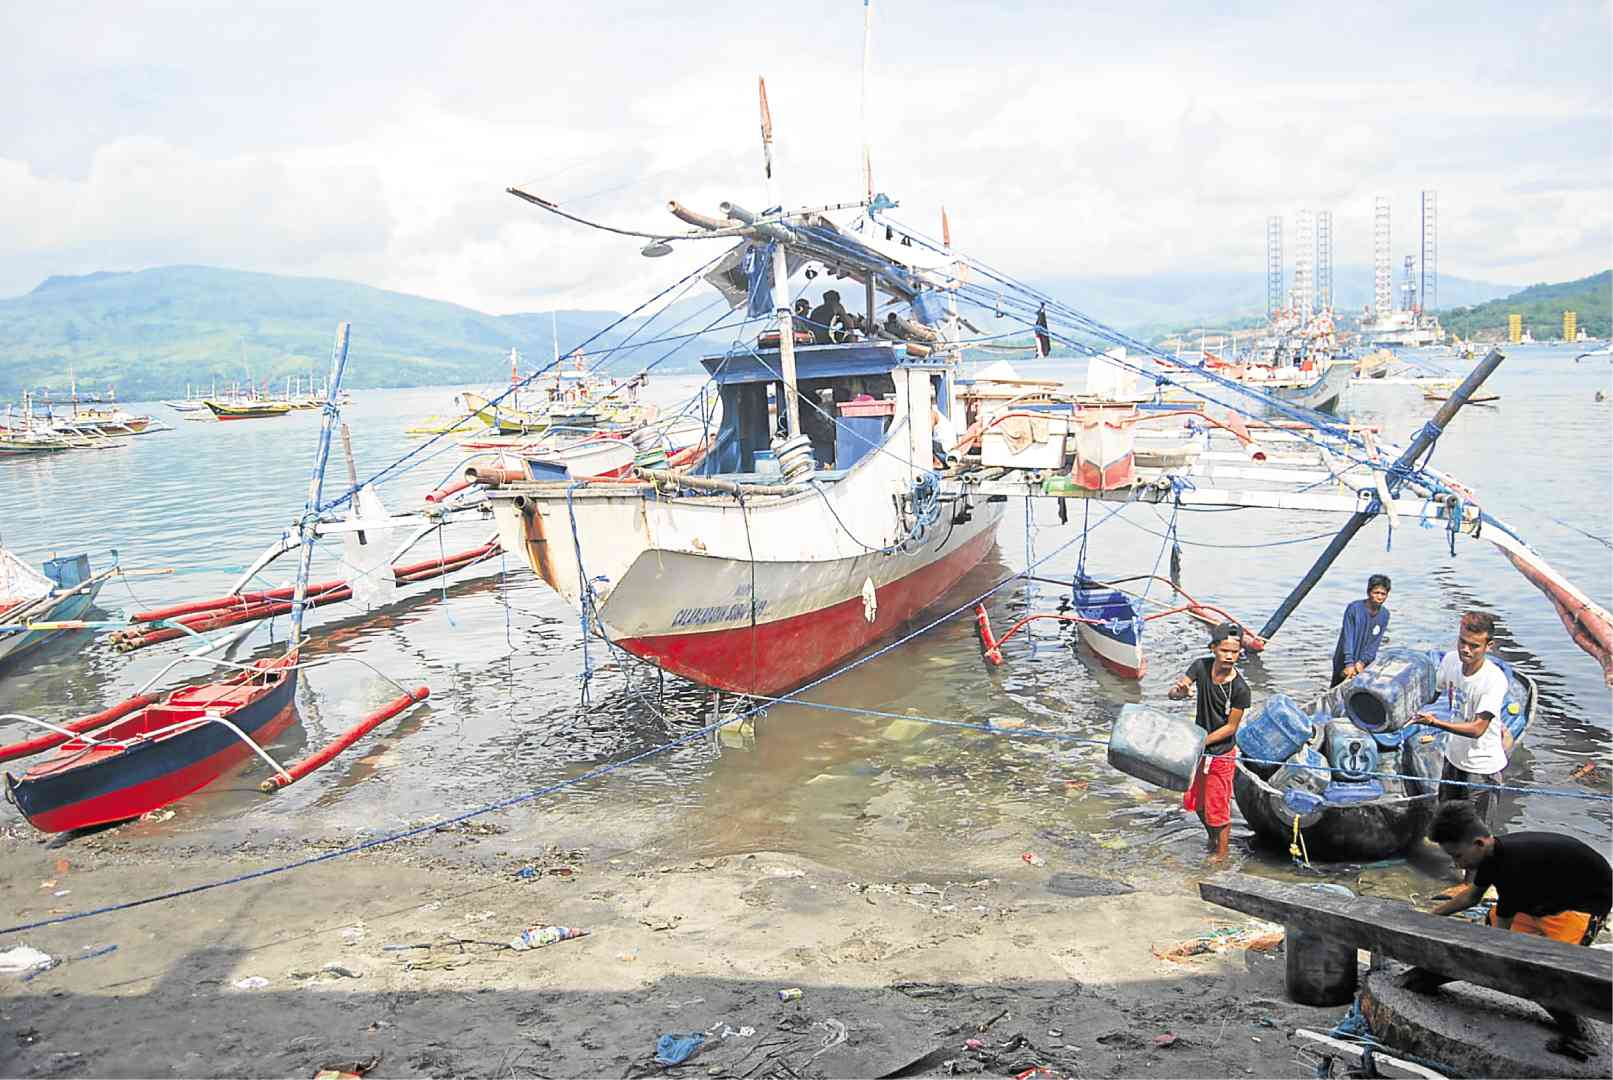 NO TO MILITIA Fishing boats are docked along the coastline of Barangay Calapandayan in Subic, Zambales province. Fishermen, who have been frequenting the Scarborough Shoal on these boats, said the plan of the government to turn them into a “maritime militia” against China’s intrusion would put their lives in peril. ALLAN MACATUNO/INQUIRER CENTRAL LUZON